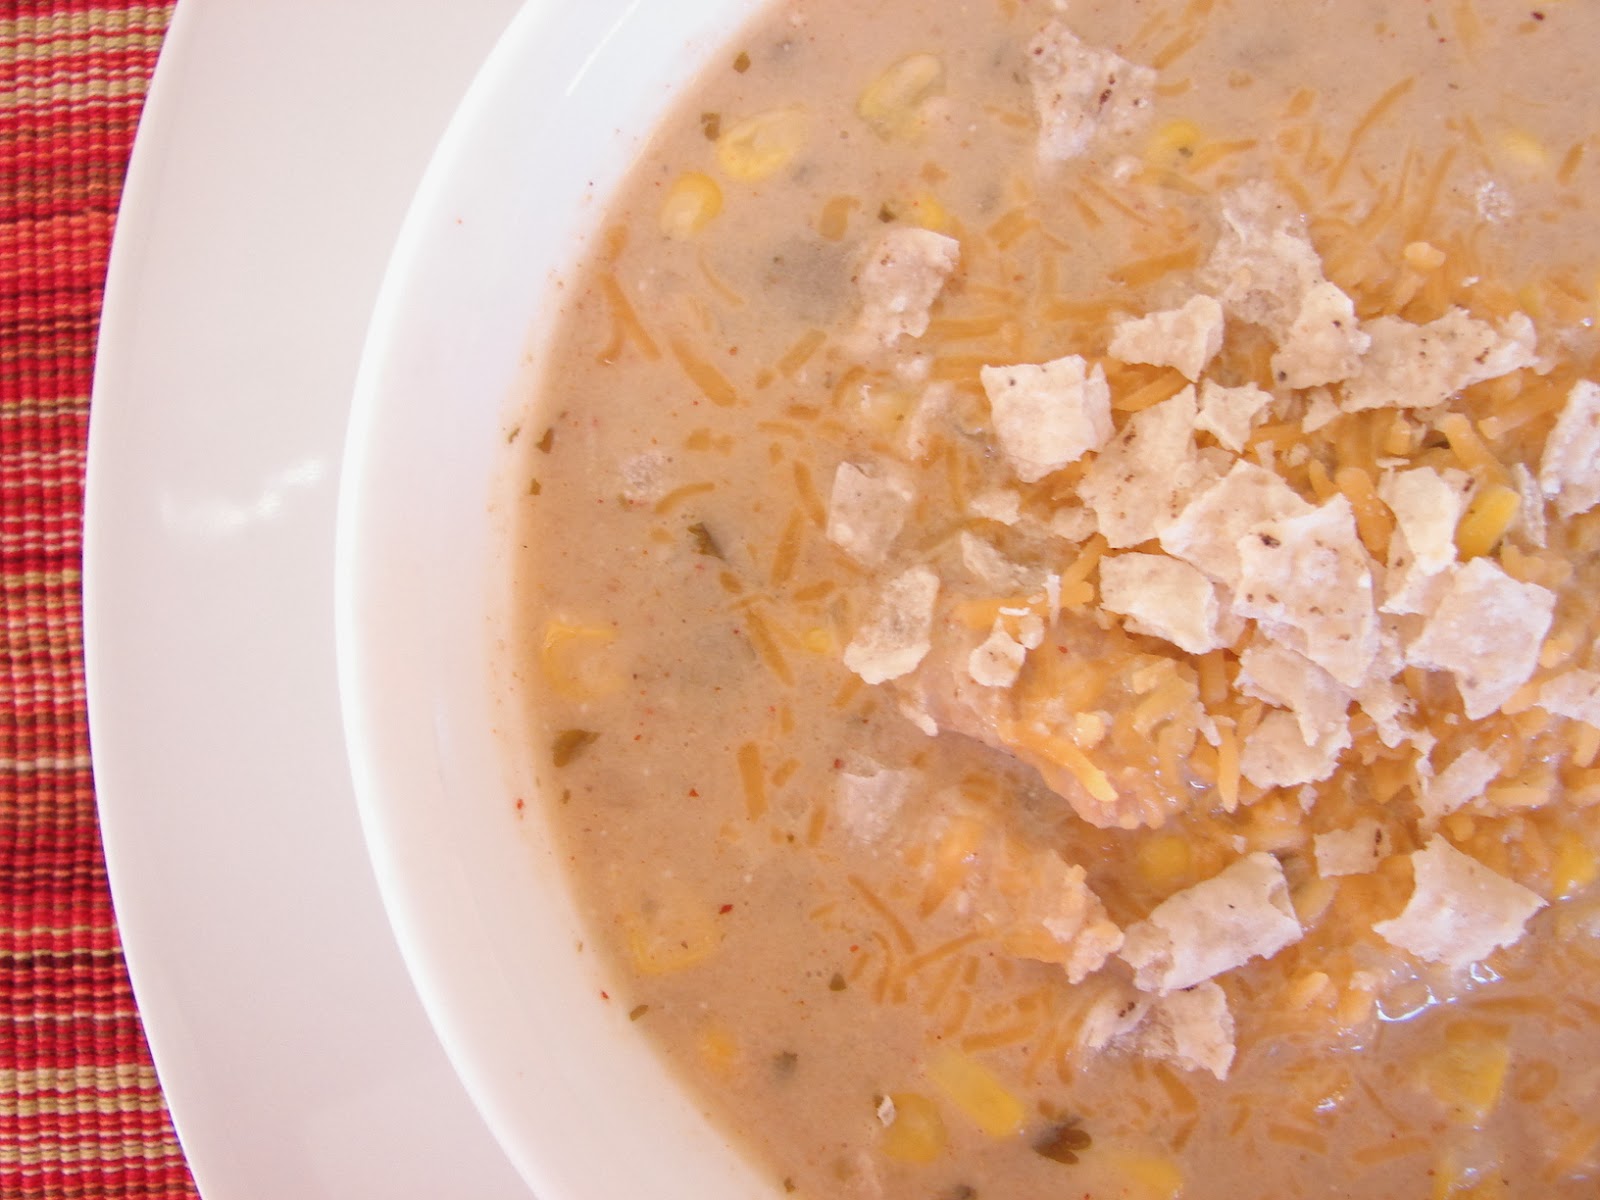 The Royal Cook: Slow Cooker Creamy Green Chile Enchilada Soup